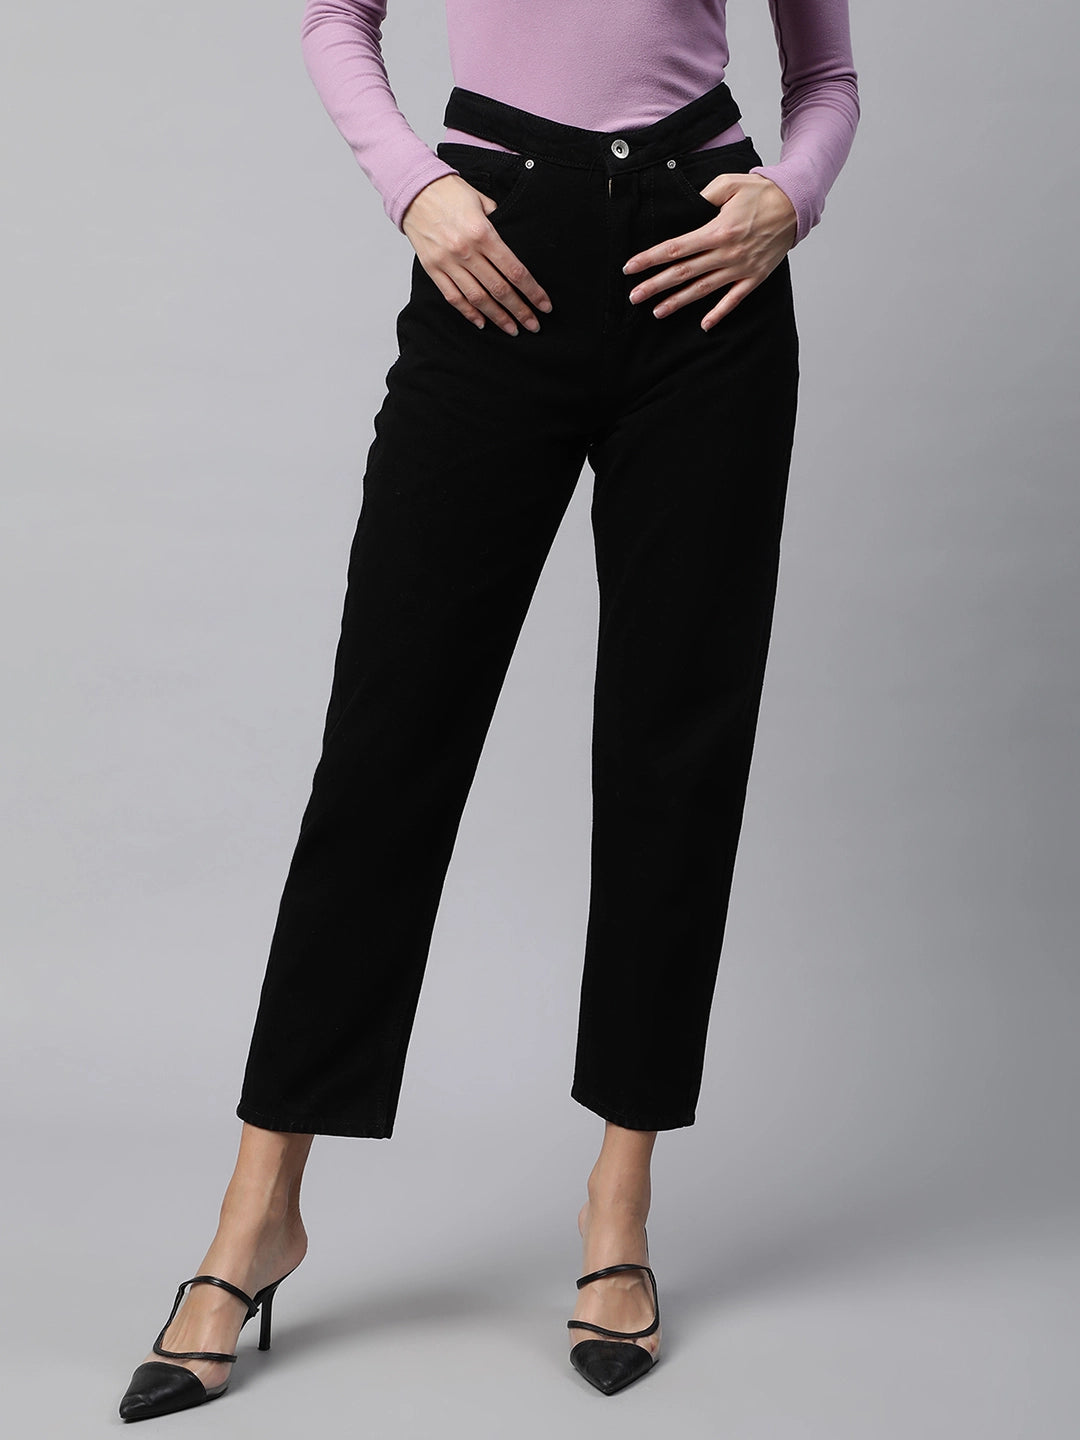 Womens Skinny Jeans, Women's High Rise Jeans